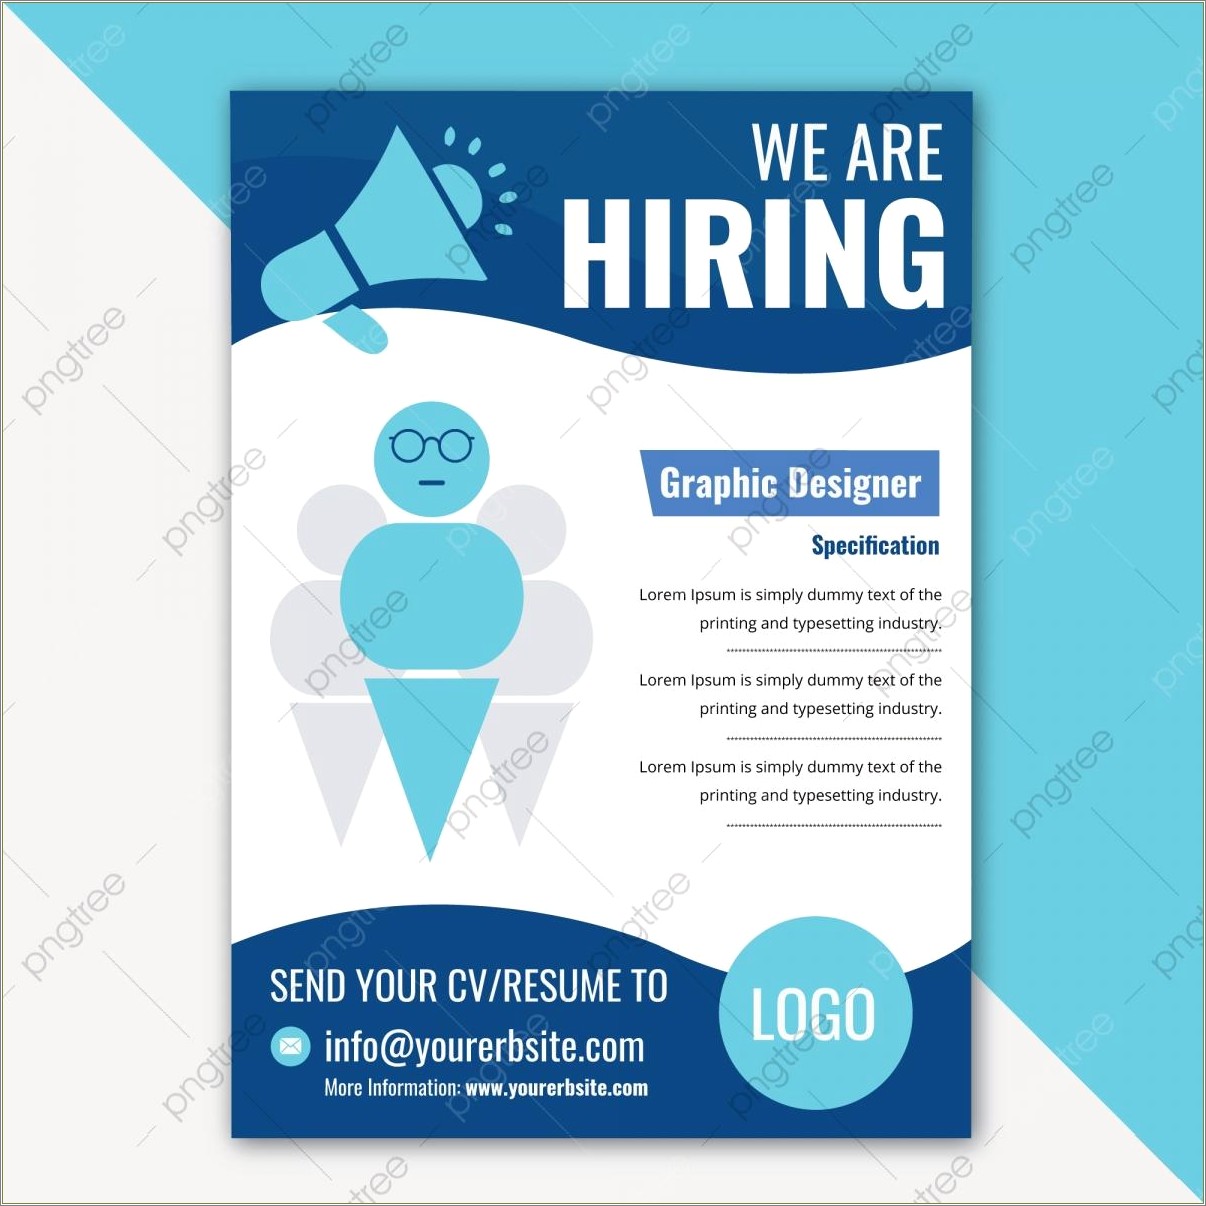 Free Templates Of Flyers For People Hiring